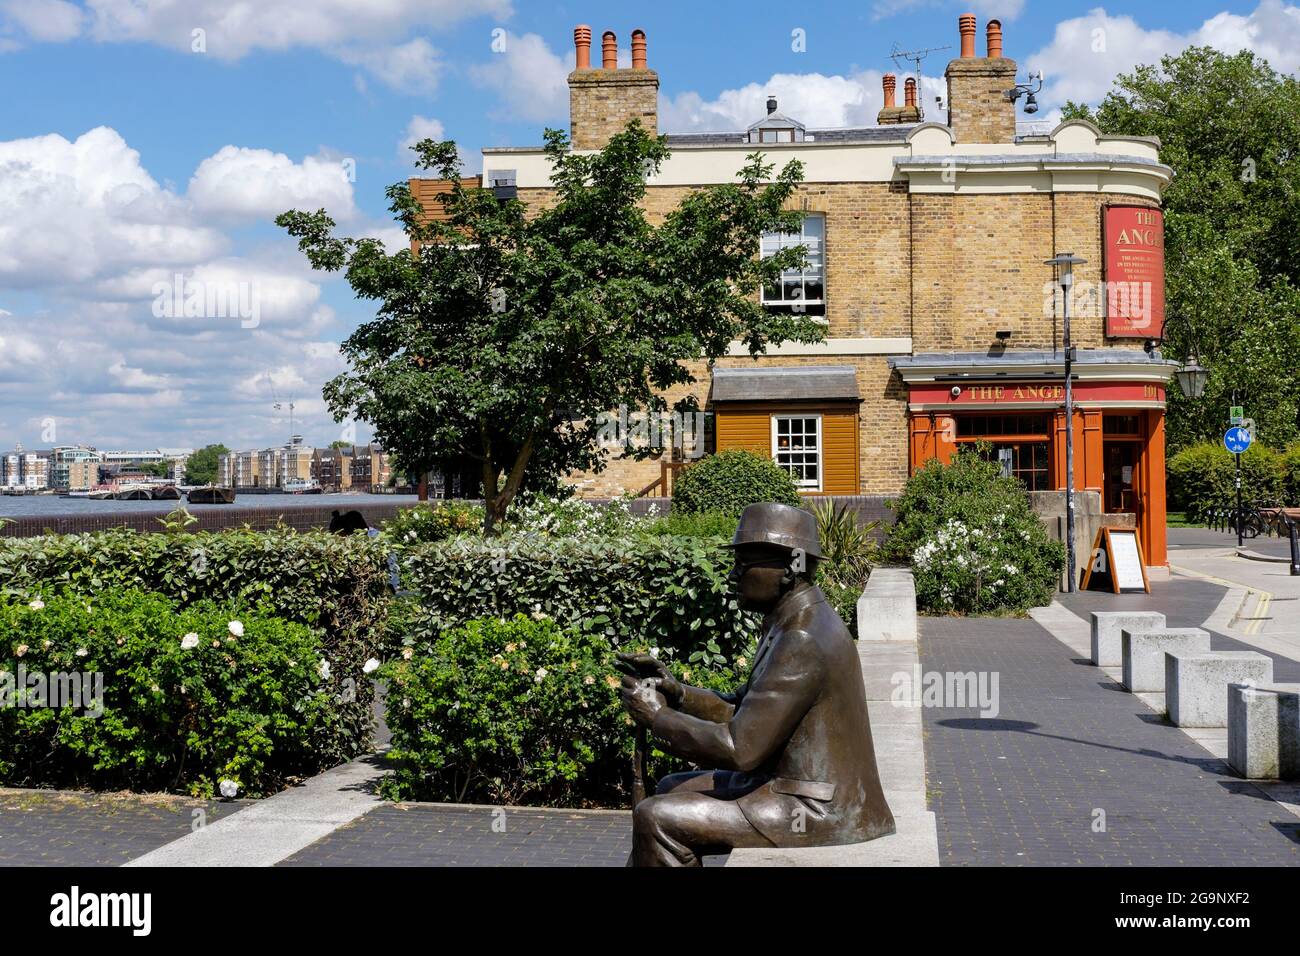 The Angel historic riverside pub on the River Thames, Rotherhithe, South London, UK Stock Photo